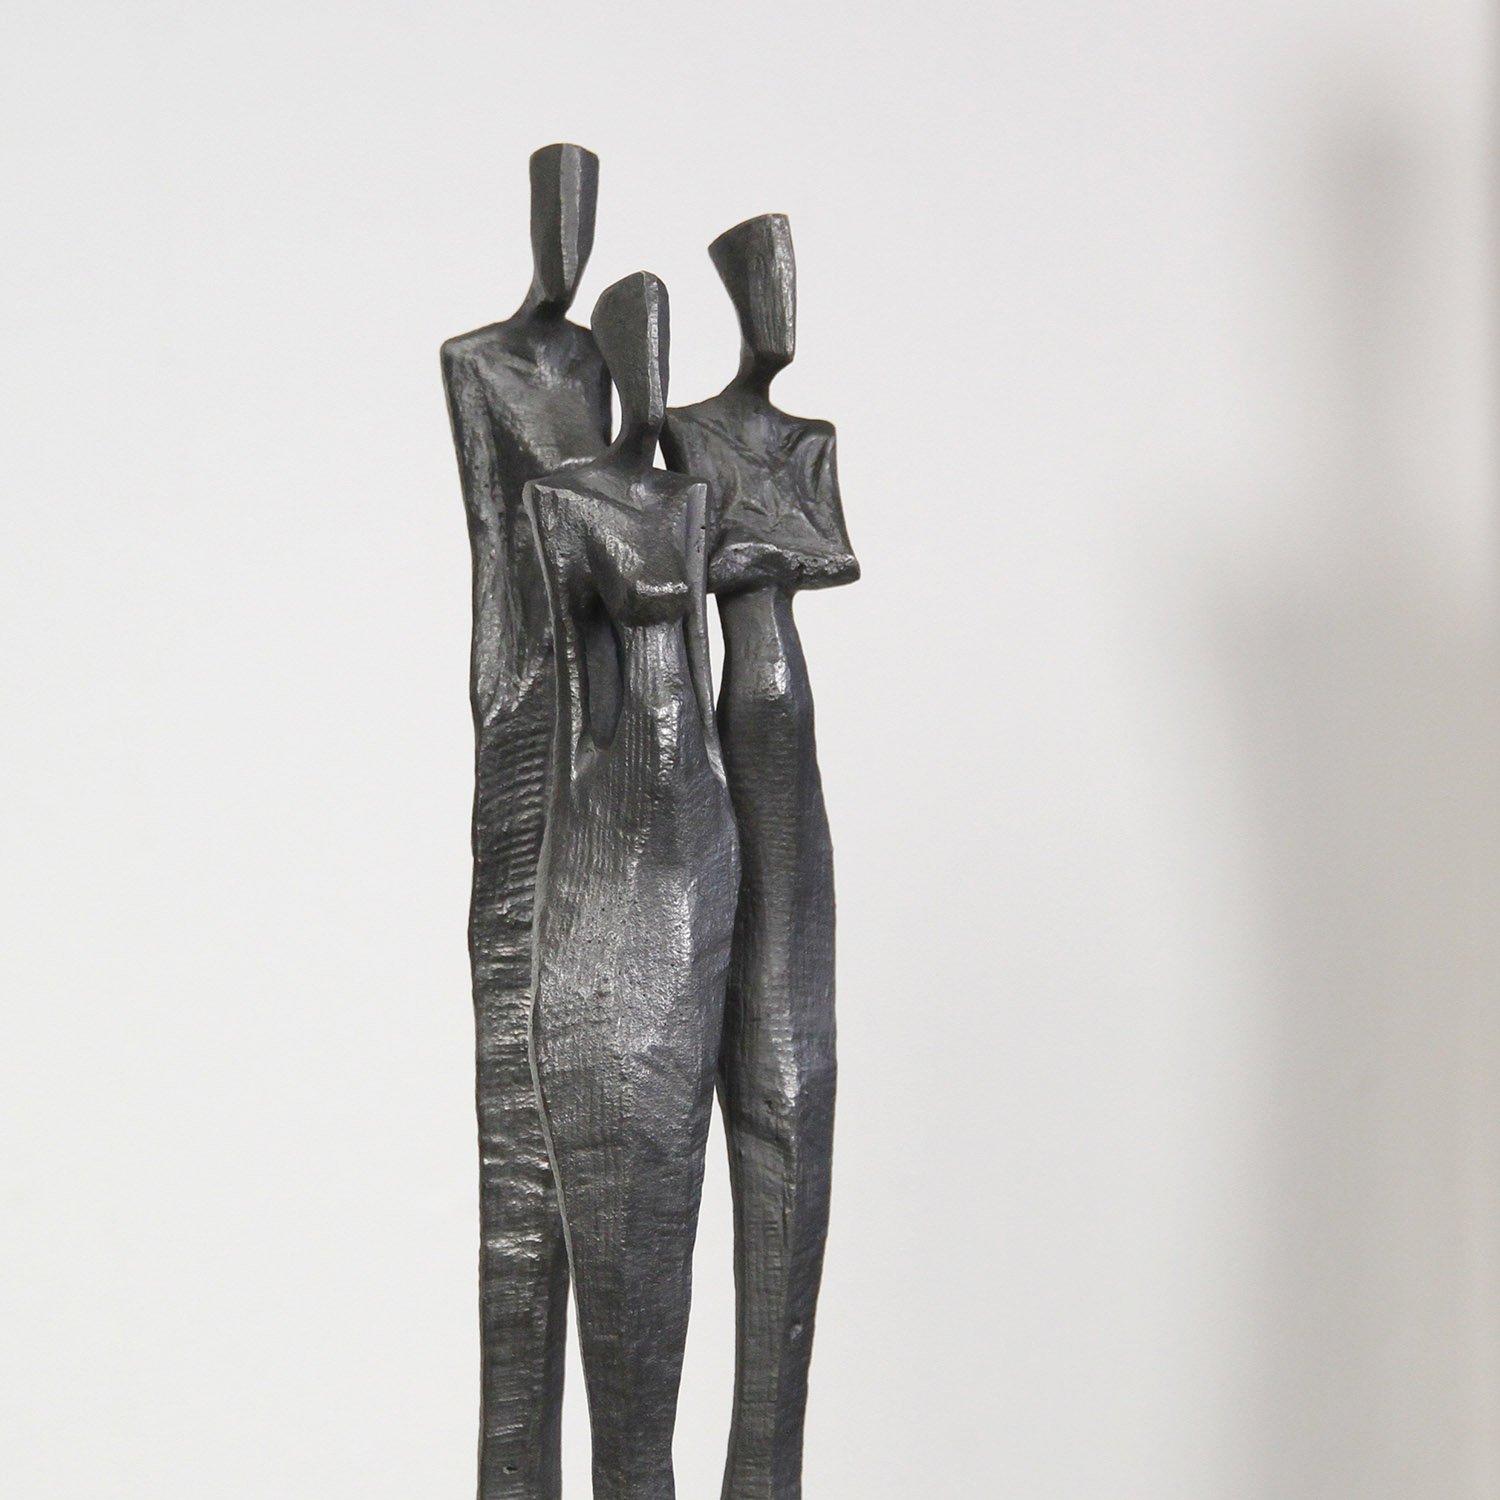 Donne V by Nando Kallweit. Bronze Sculpture of 3 female figures , Edition of 25 For Sale 3